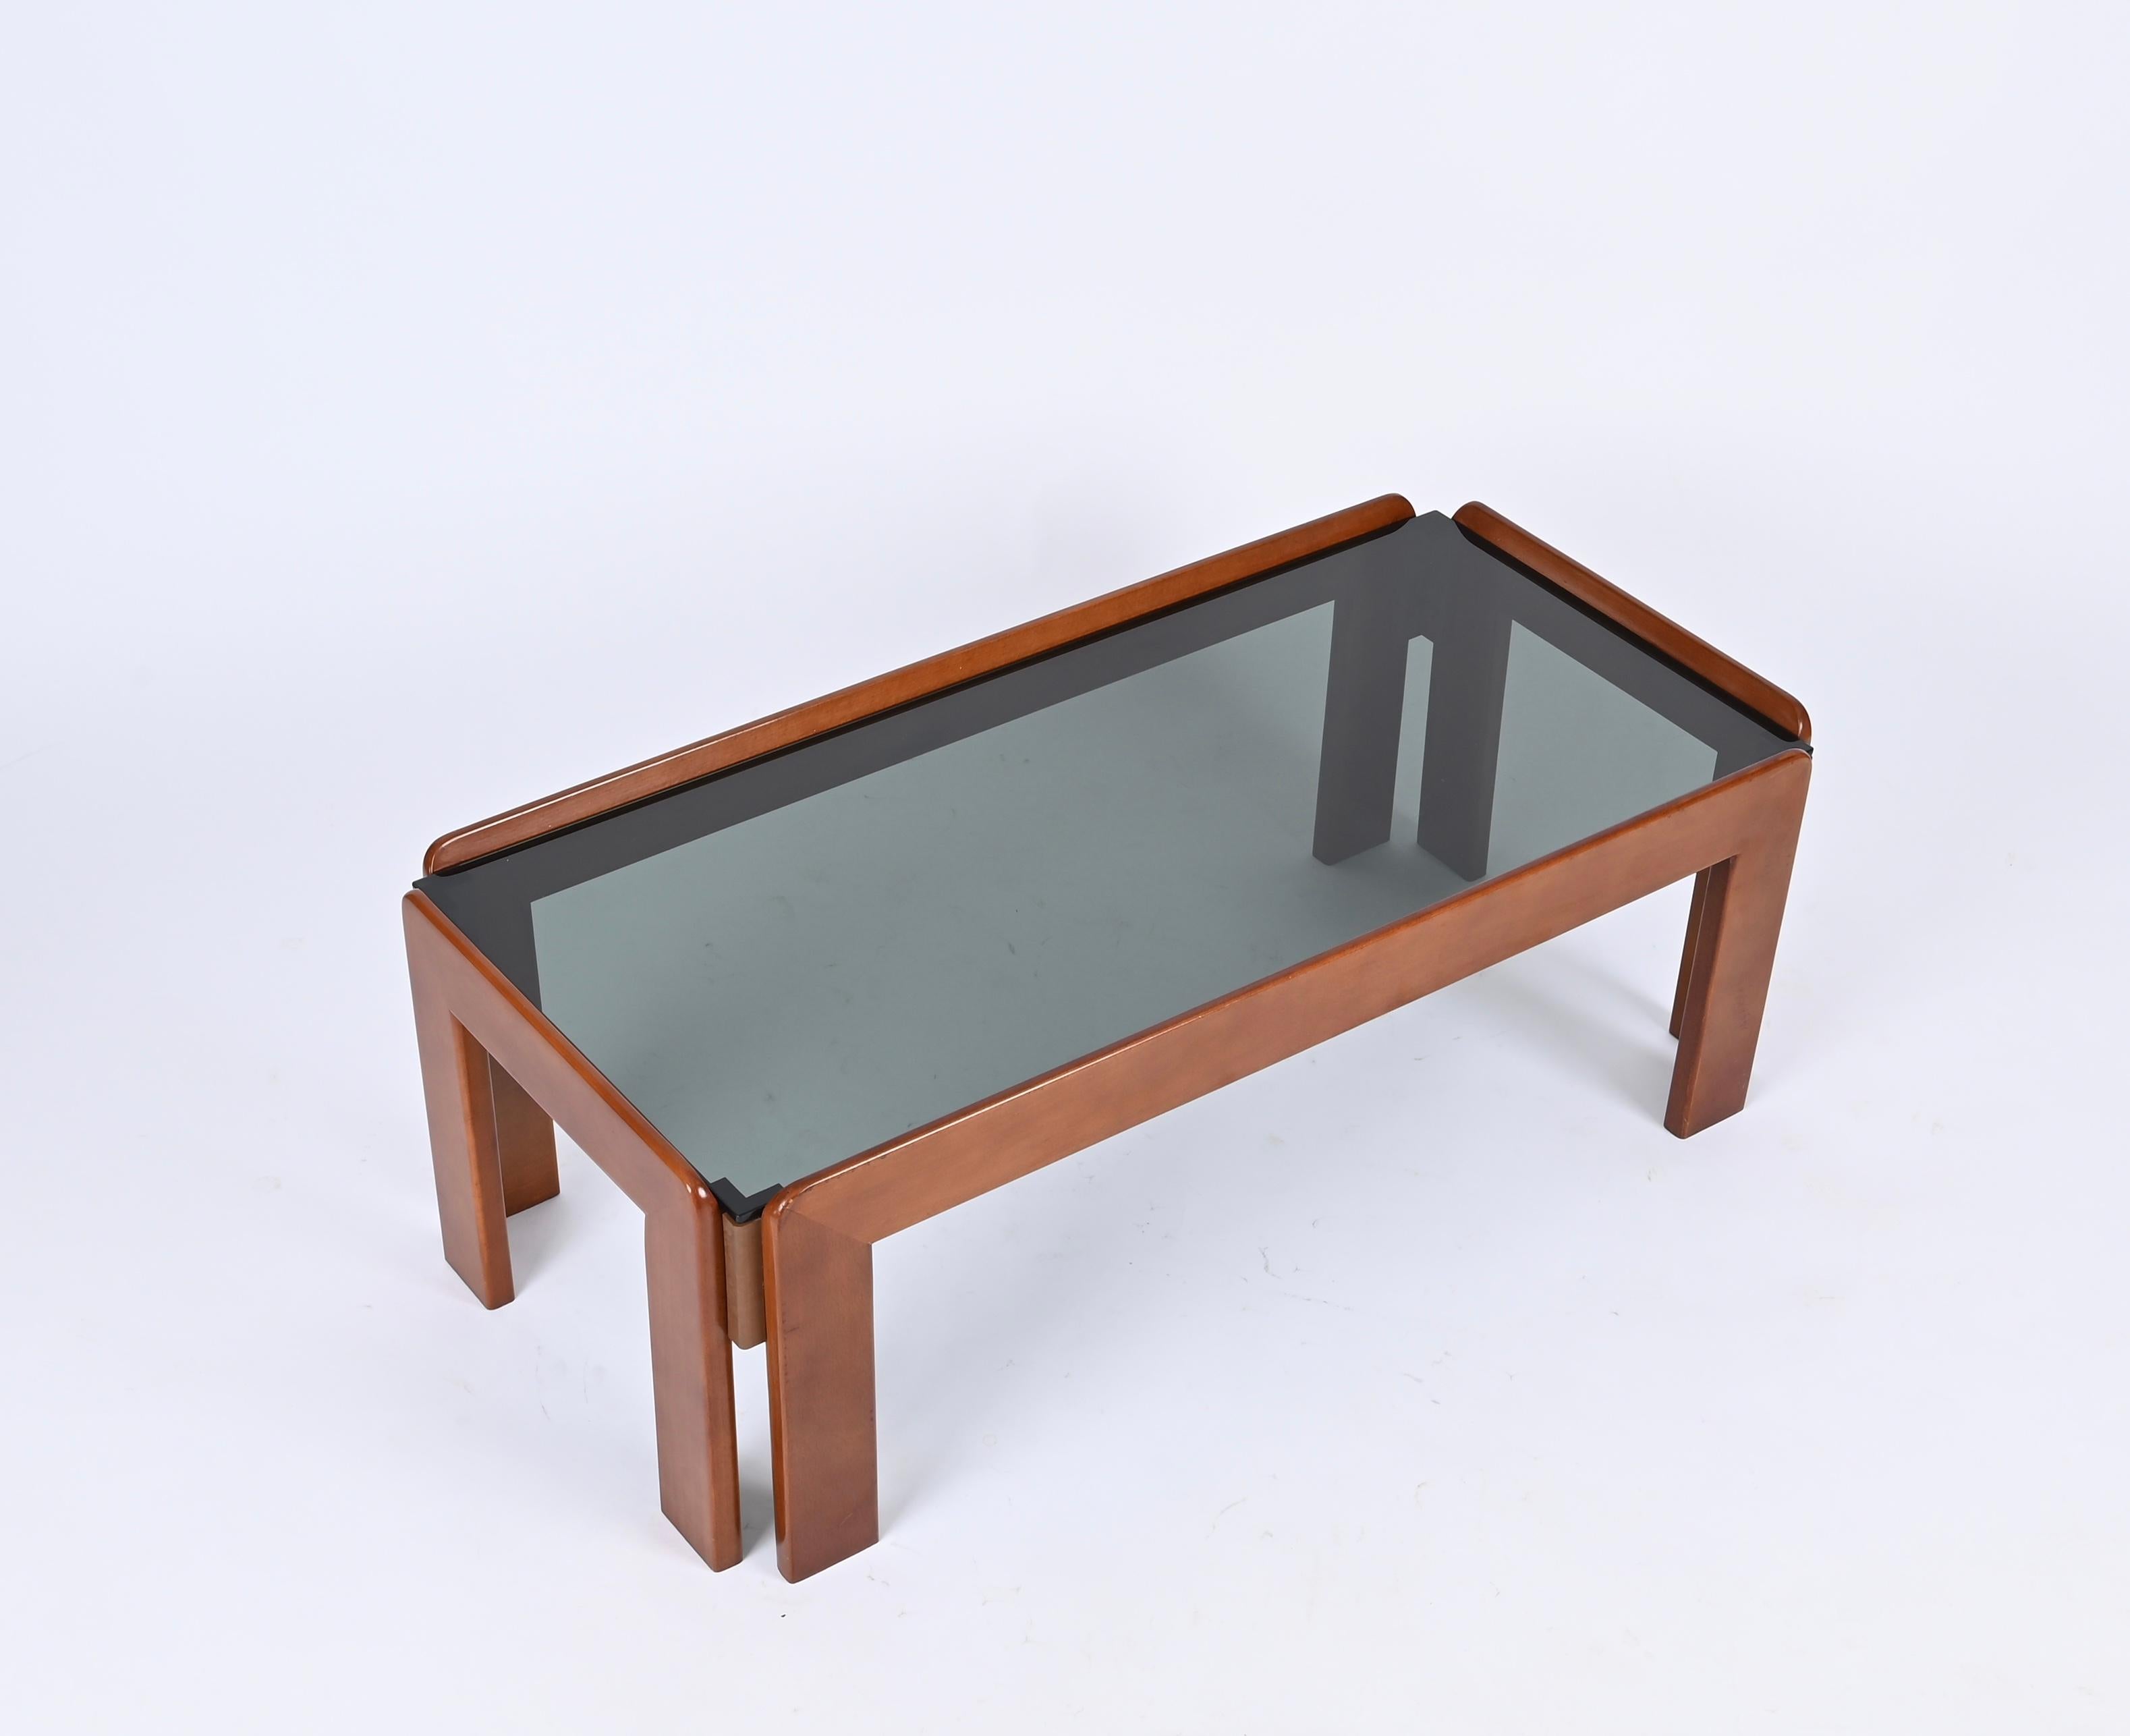 Tobia Scarpa Rectangular Walnut Coffee Table with Smoked Glass, Italy 1960s For Sale 3